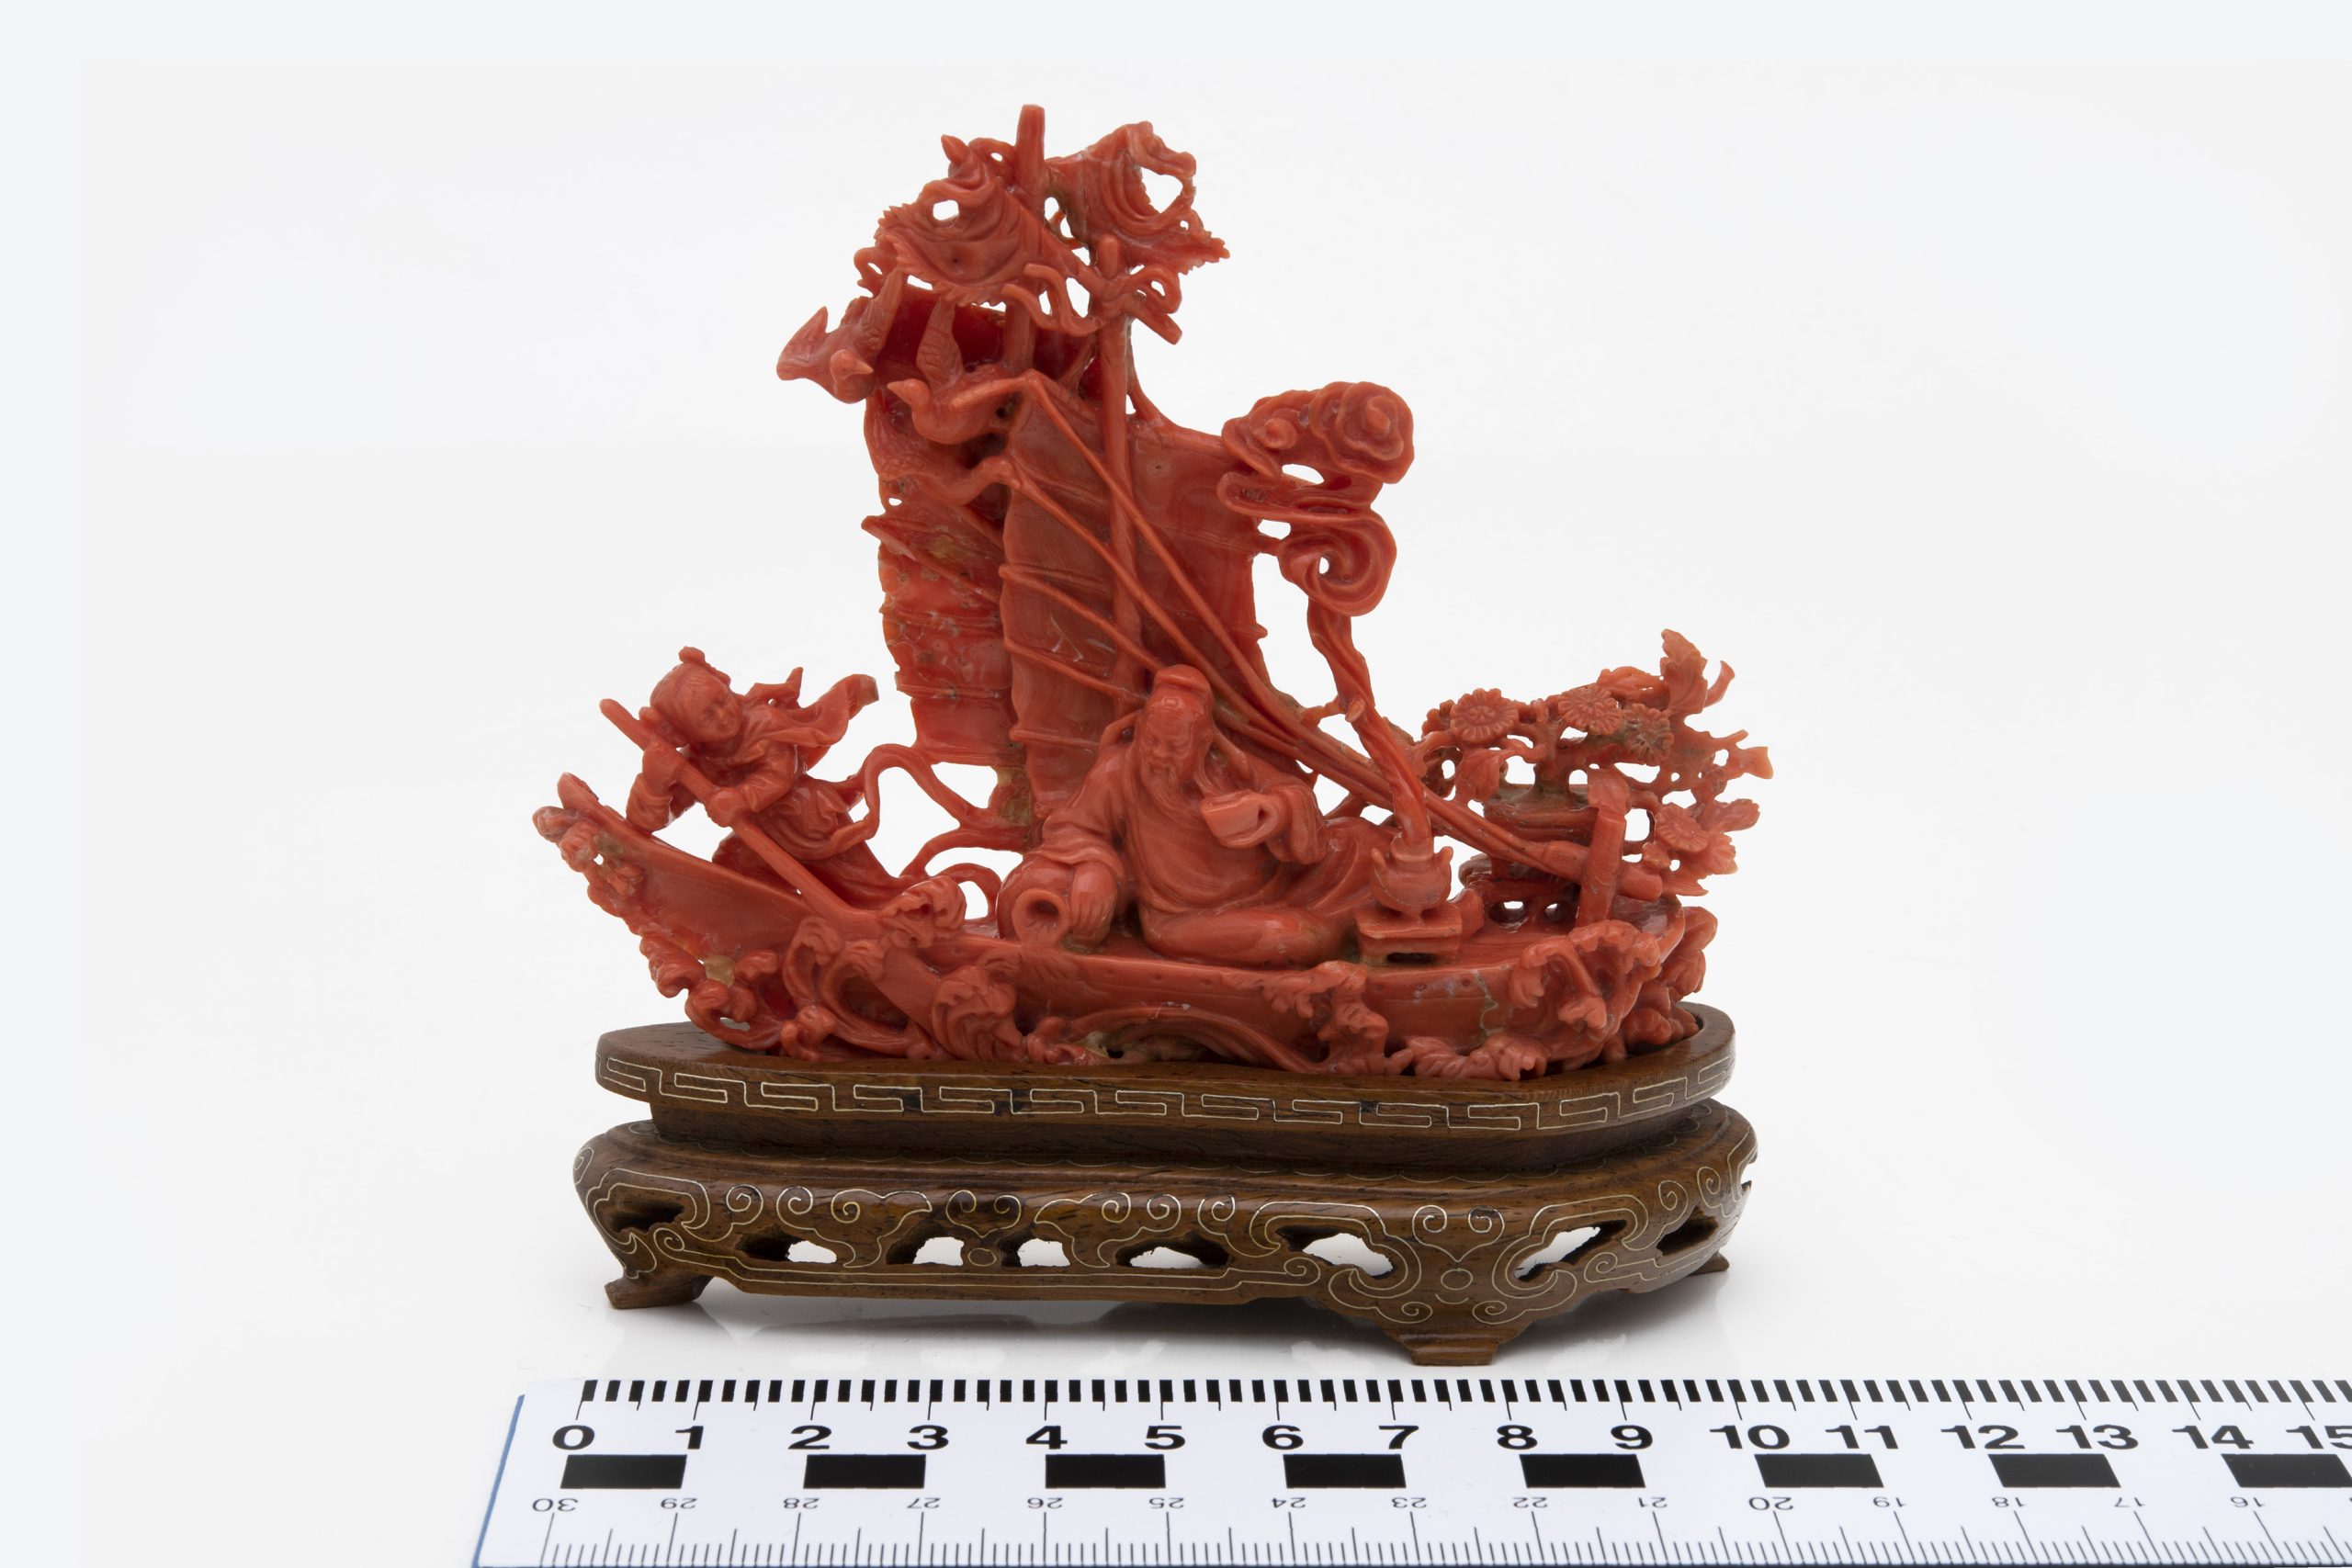 A carved red coral boat done in an intricate asian style.